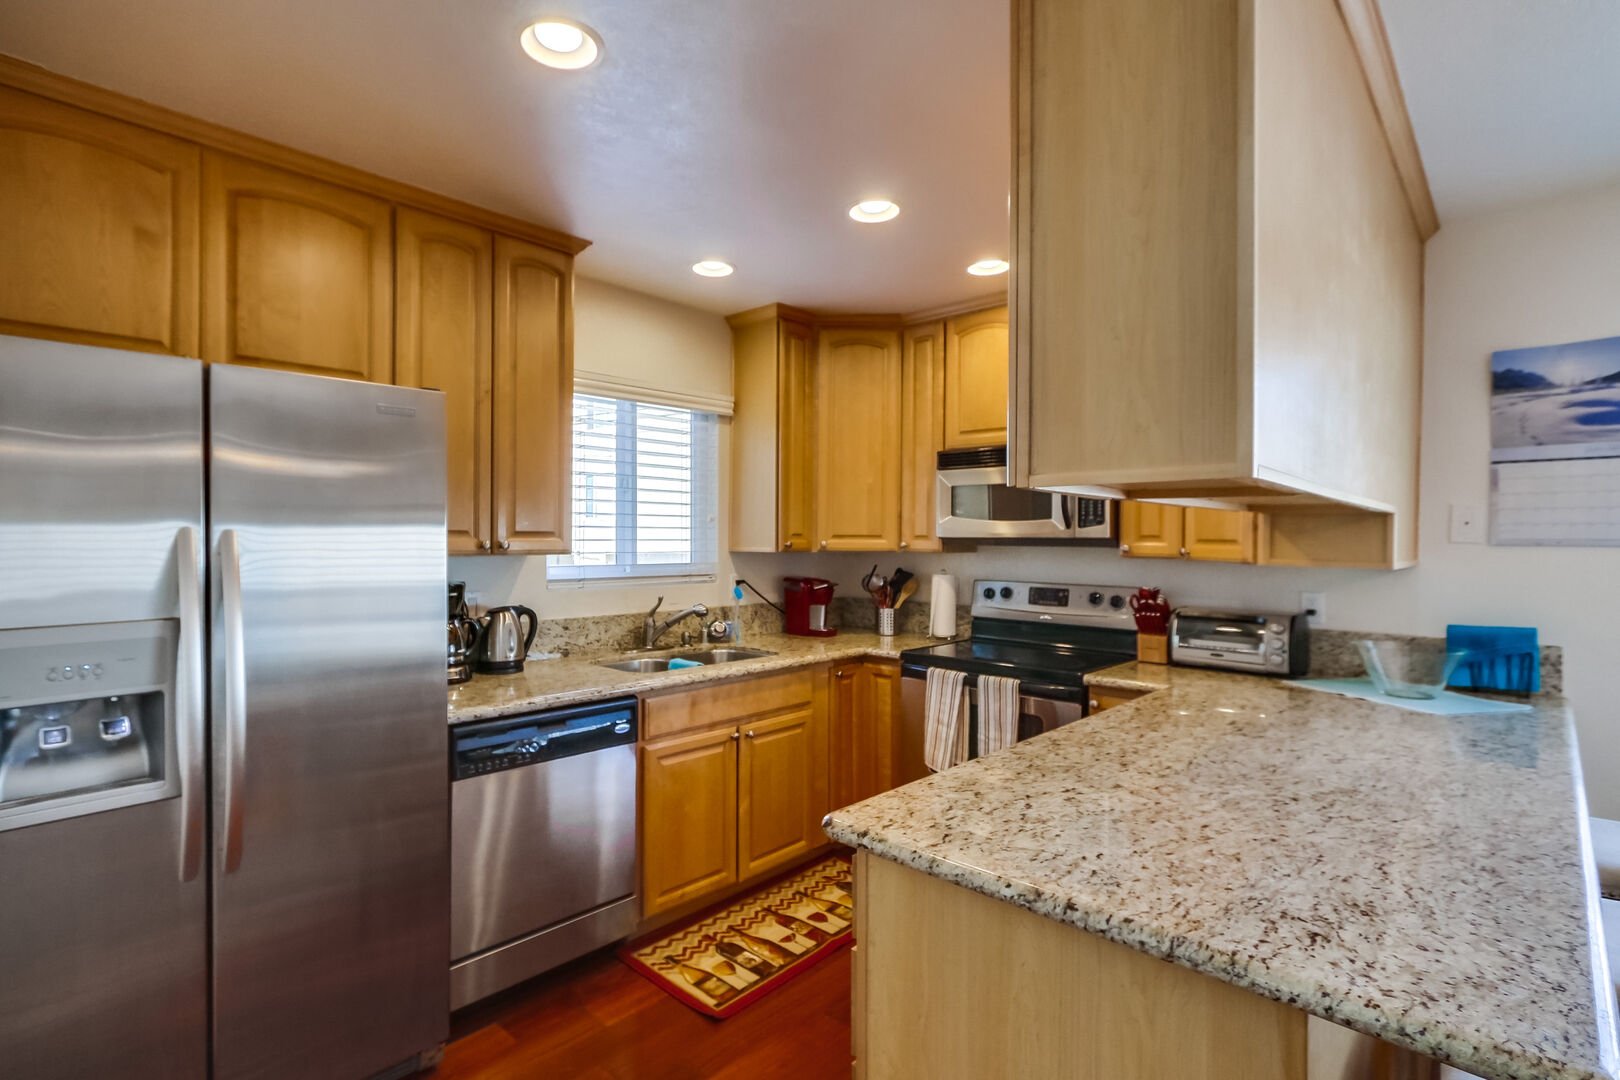 Kitchen with stainless steel appliances, granite countertops, sink, dishwasher, refrigerator, coffee maker, toaster, and blender